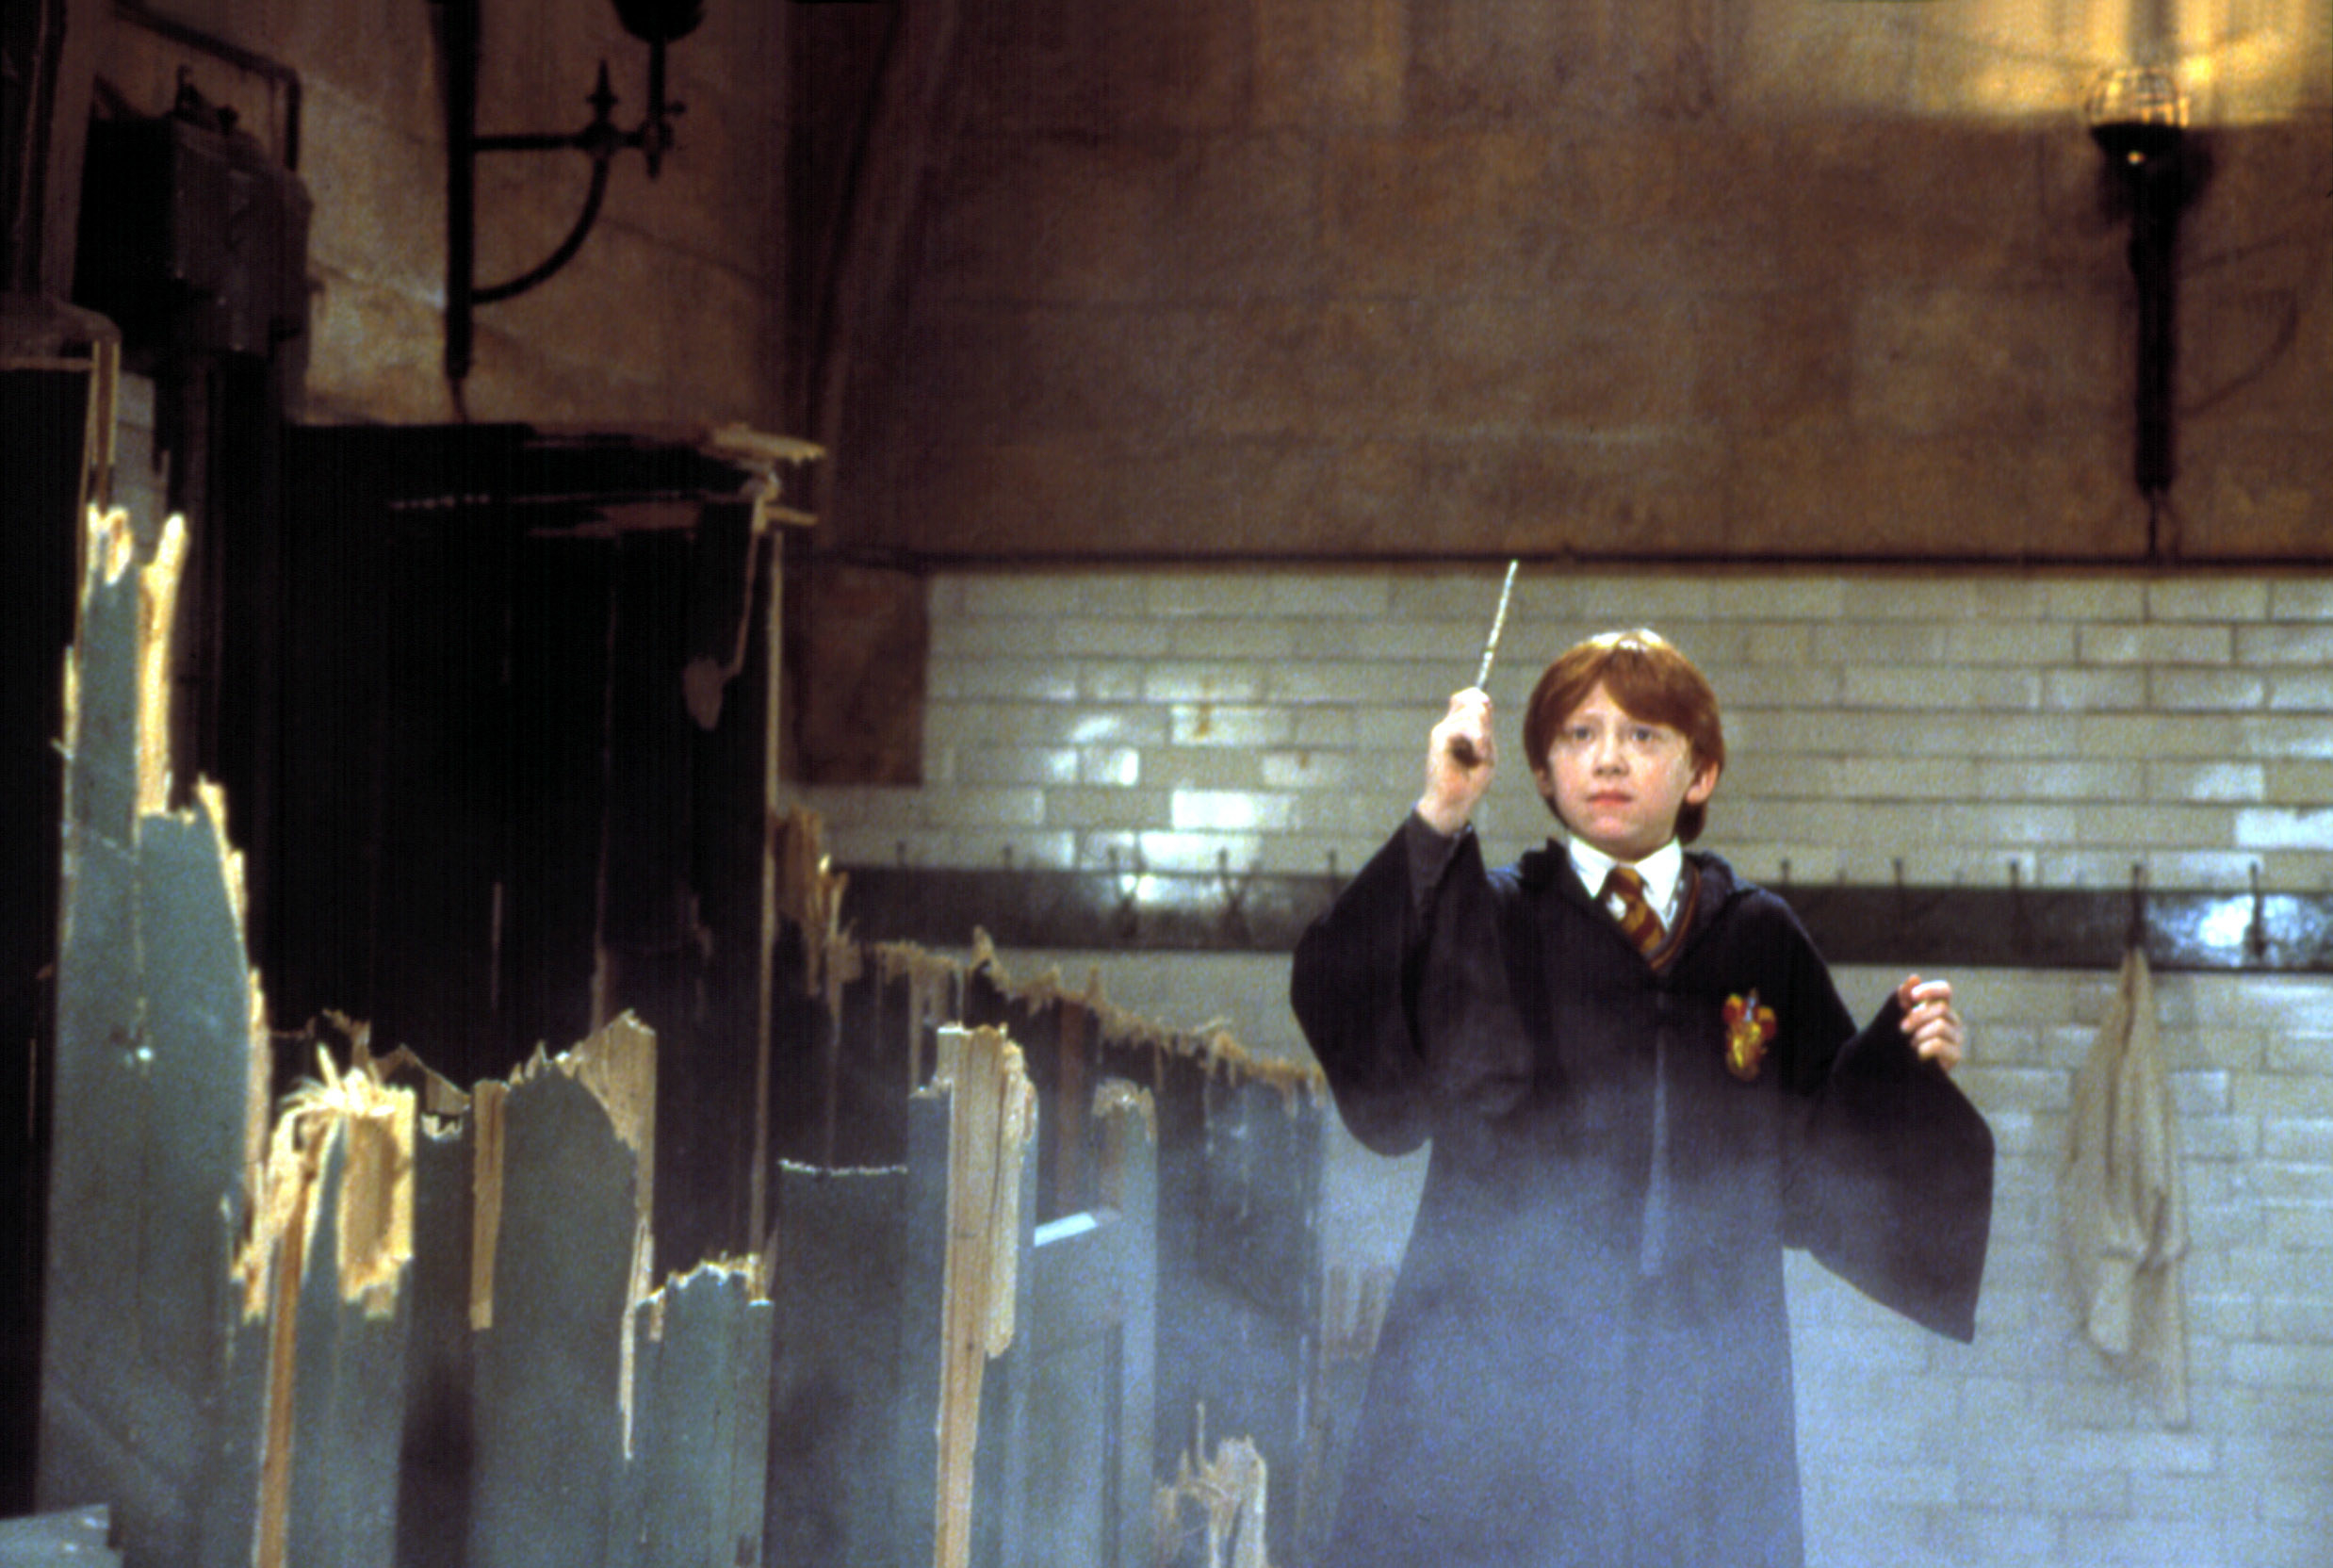 Rupert Grint points his wand in a destroyed bathroom